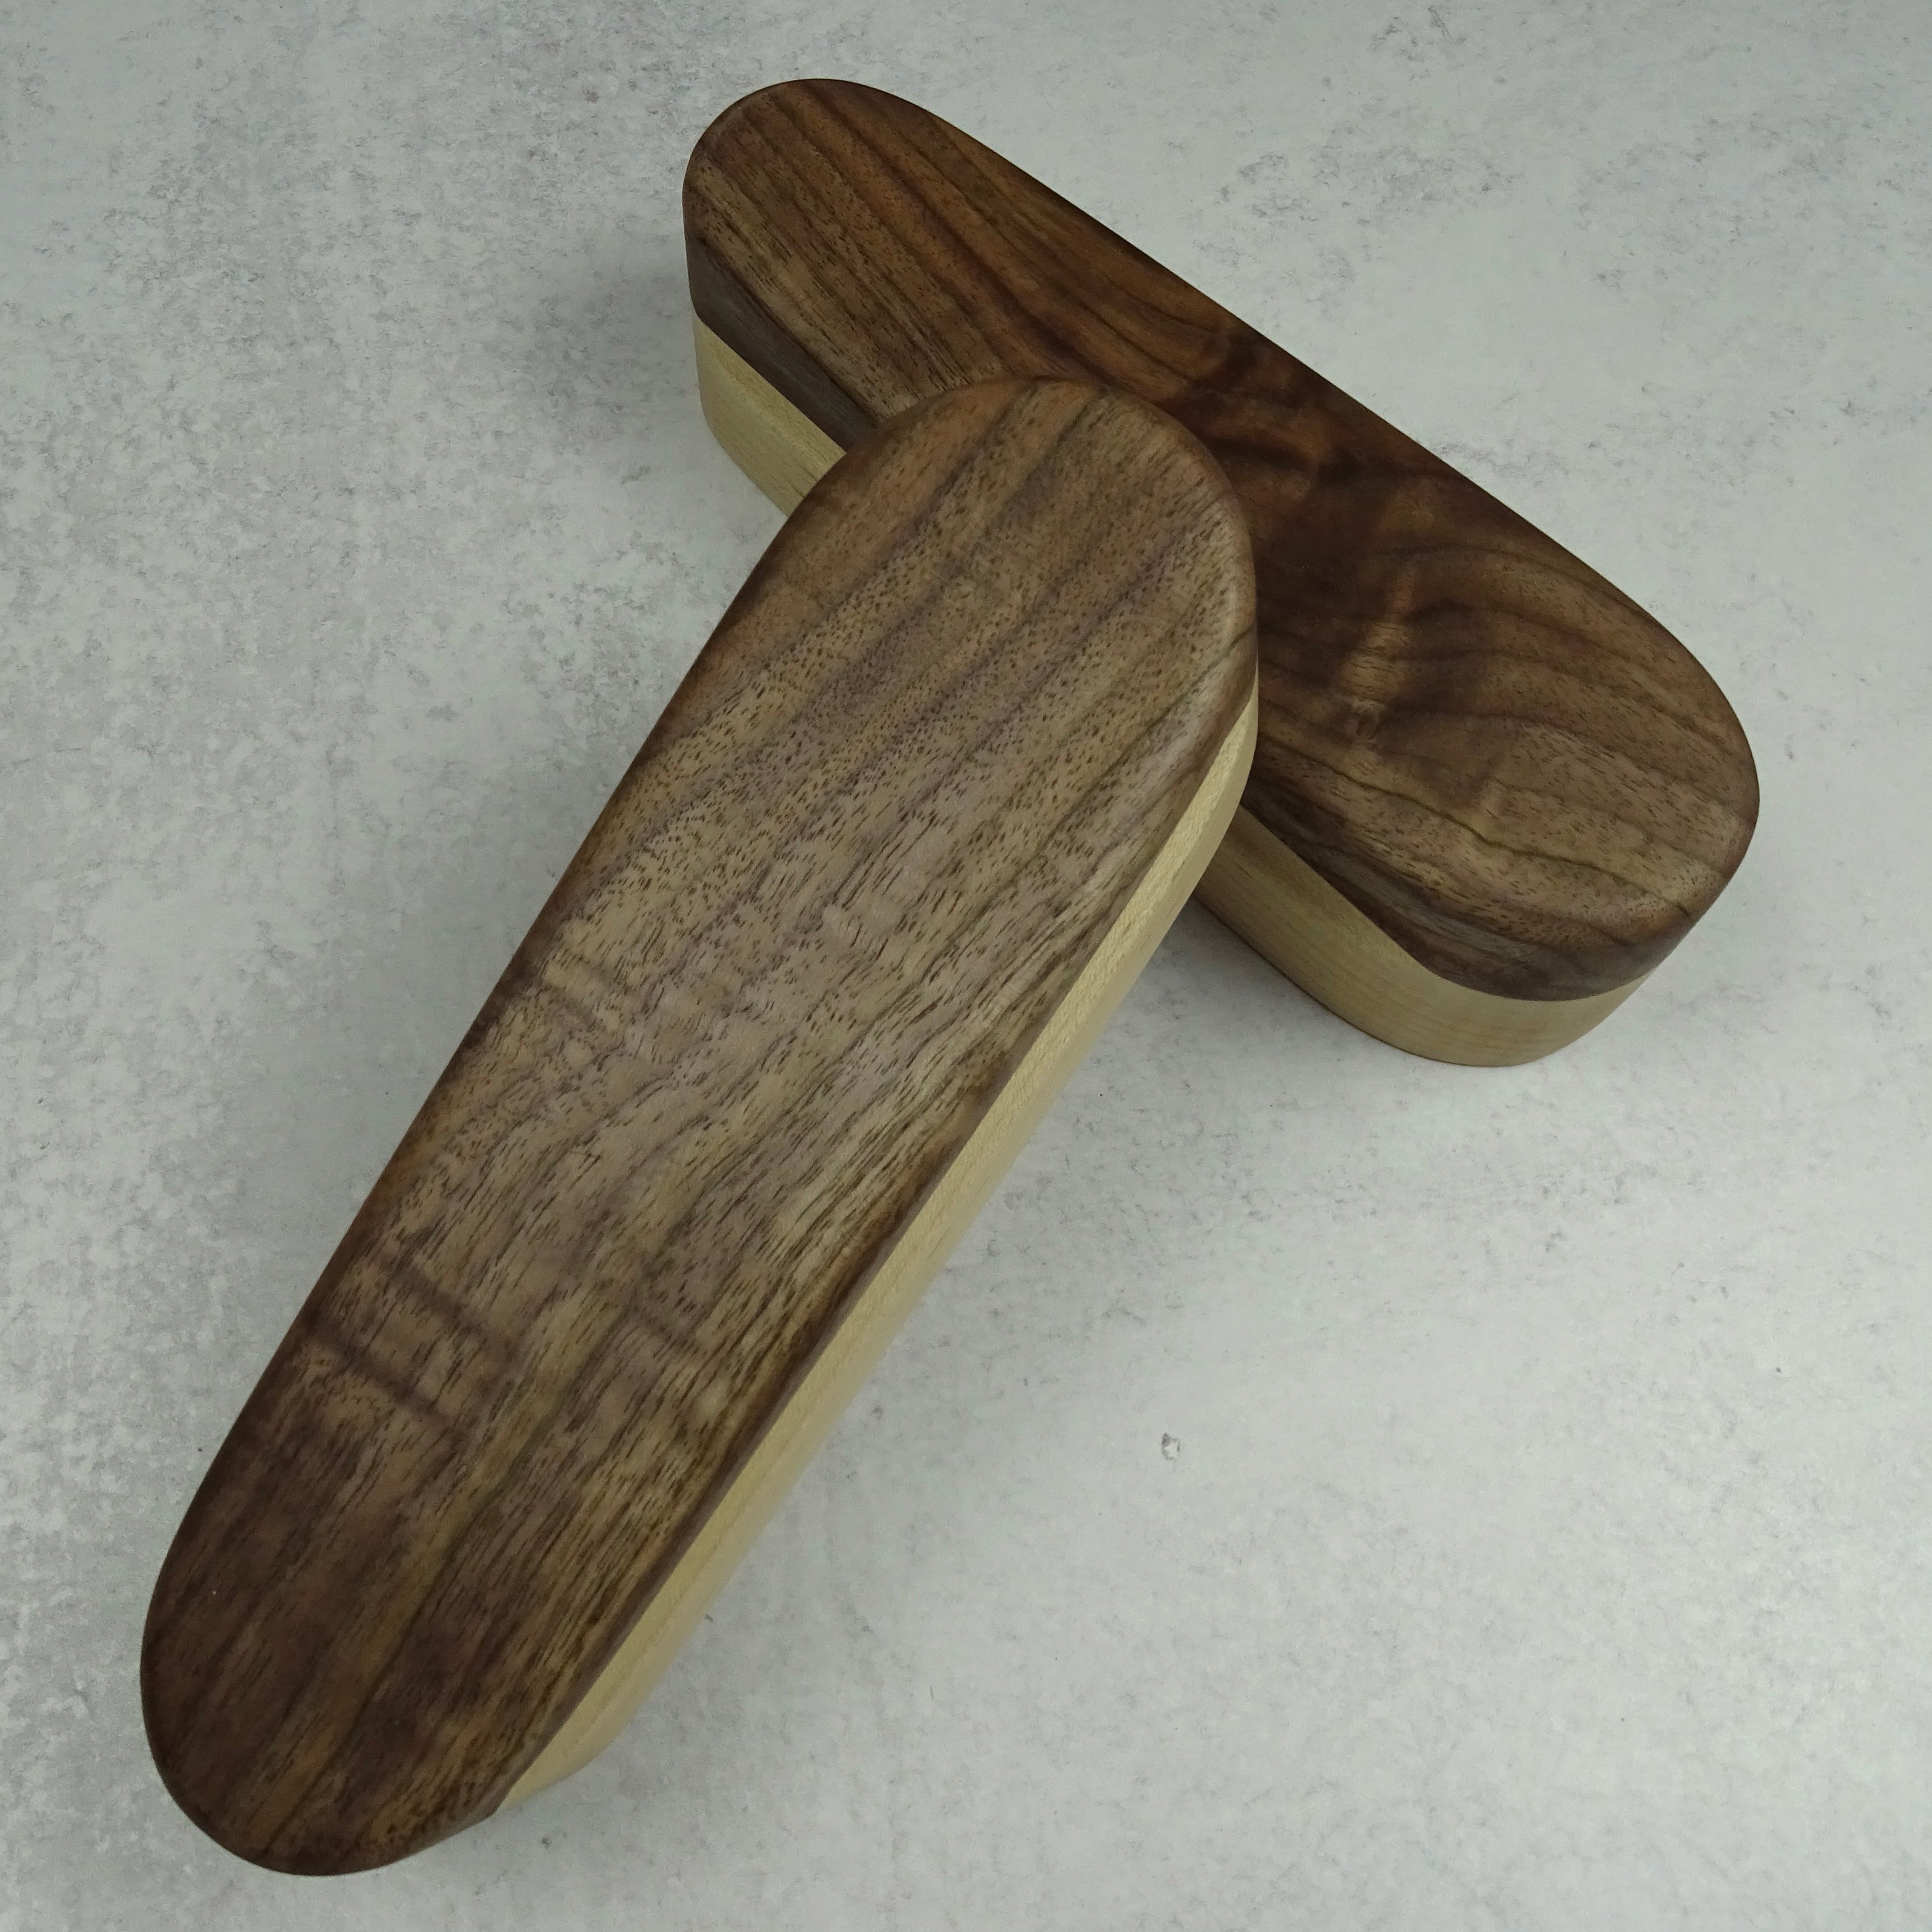 Handmade Tailor's Clapper Maple Hardwood Clapper Wooden Sewing